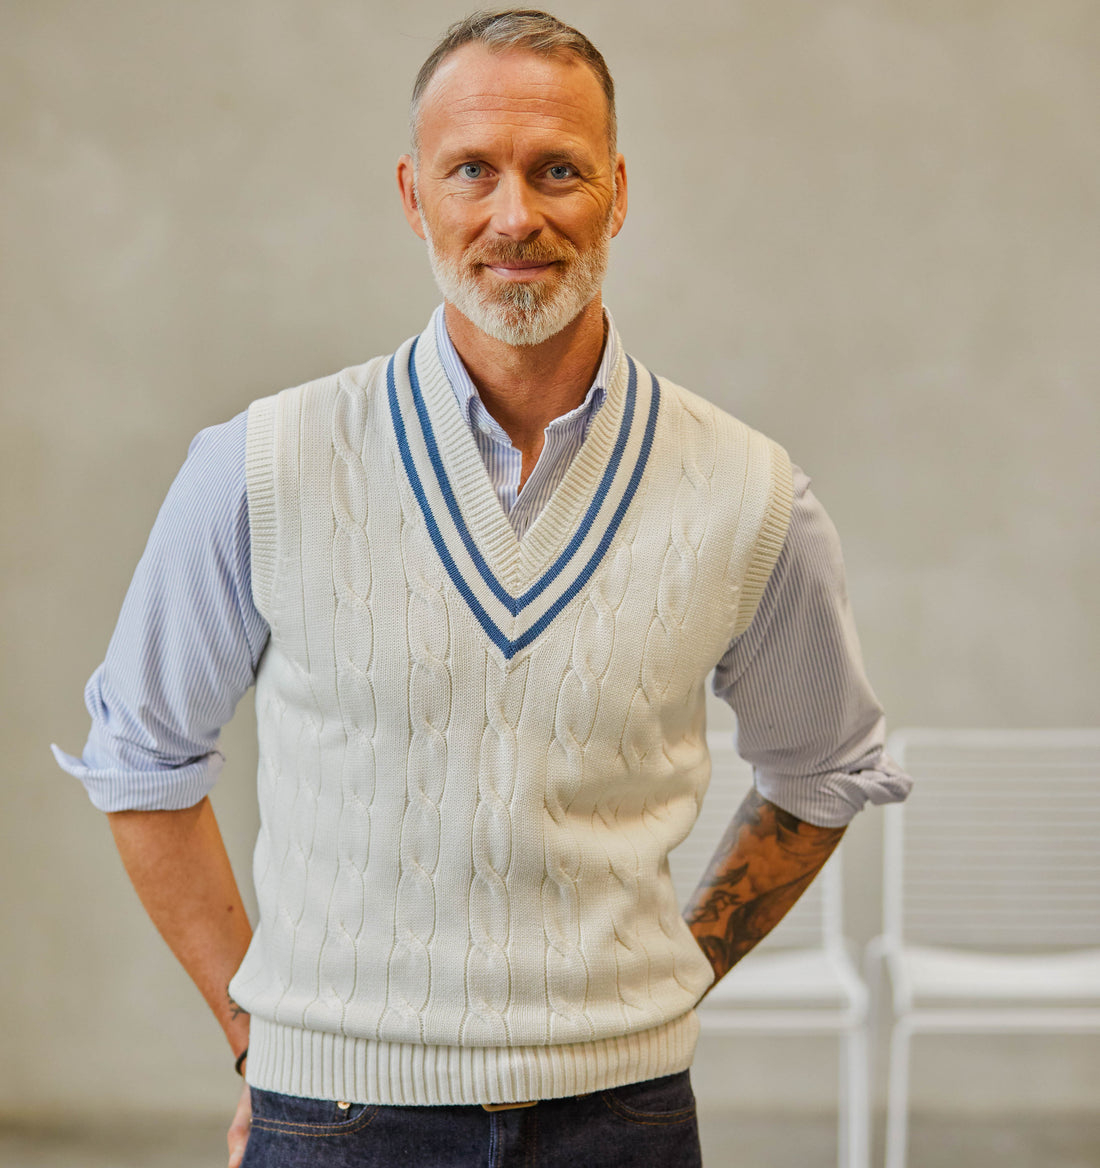 Middle-aged man with a beard, wearing a white cable-knit sweater vest, posing in a studio with a neutral background.